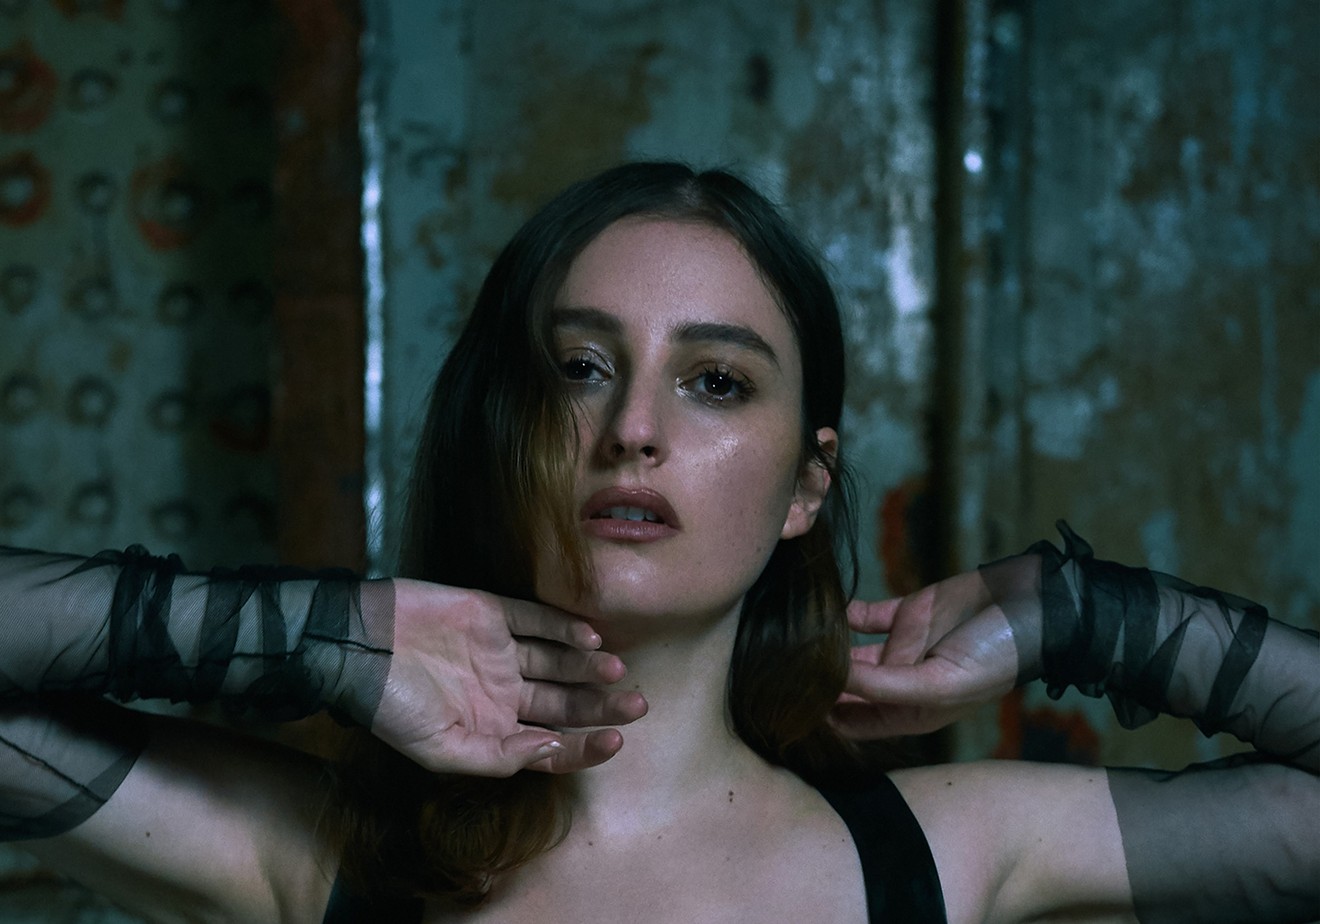 III is Banks' most revealing album to date.